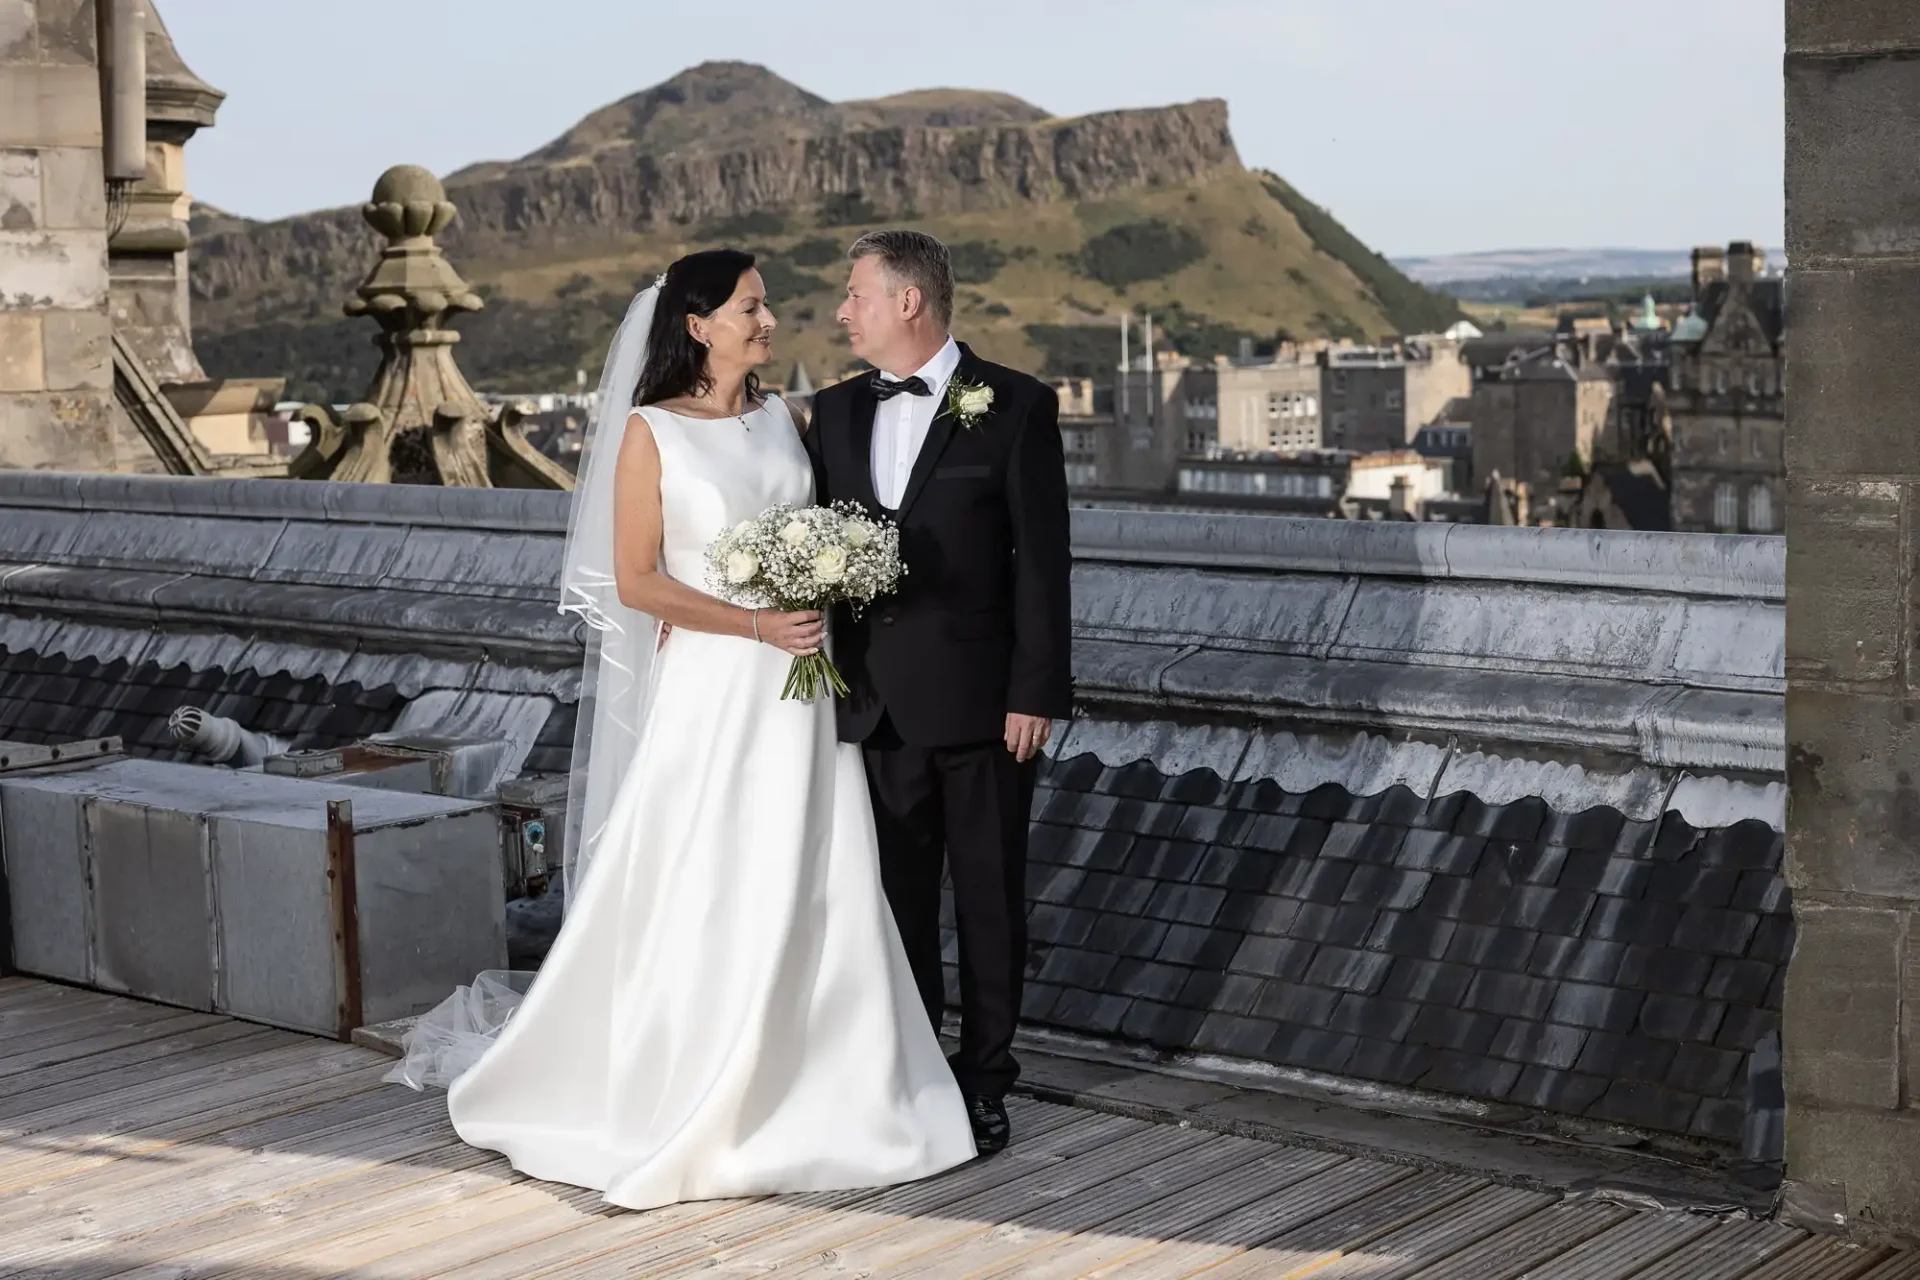 A bride and groom holding hands and smiling at each other on a rooftop, with a cityscape and mountains in the background.